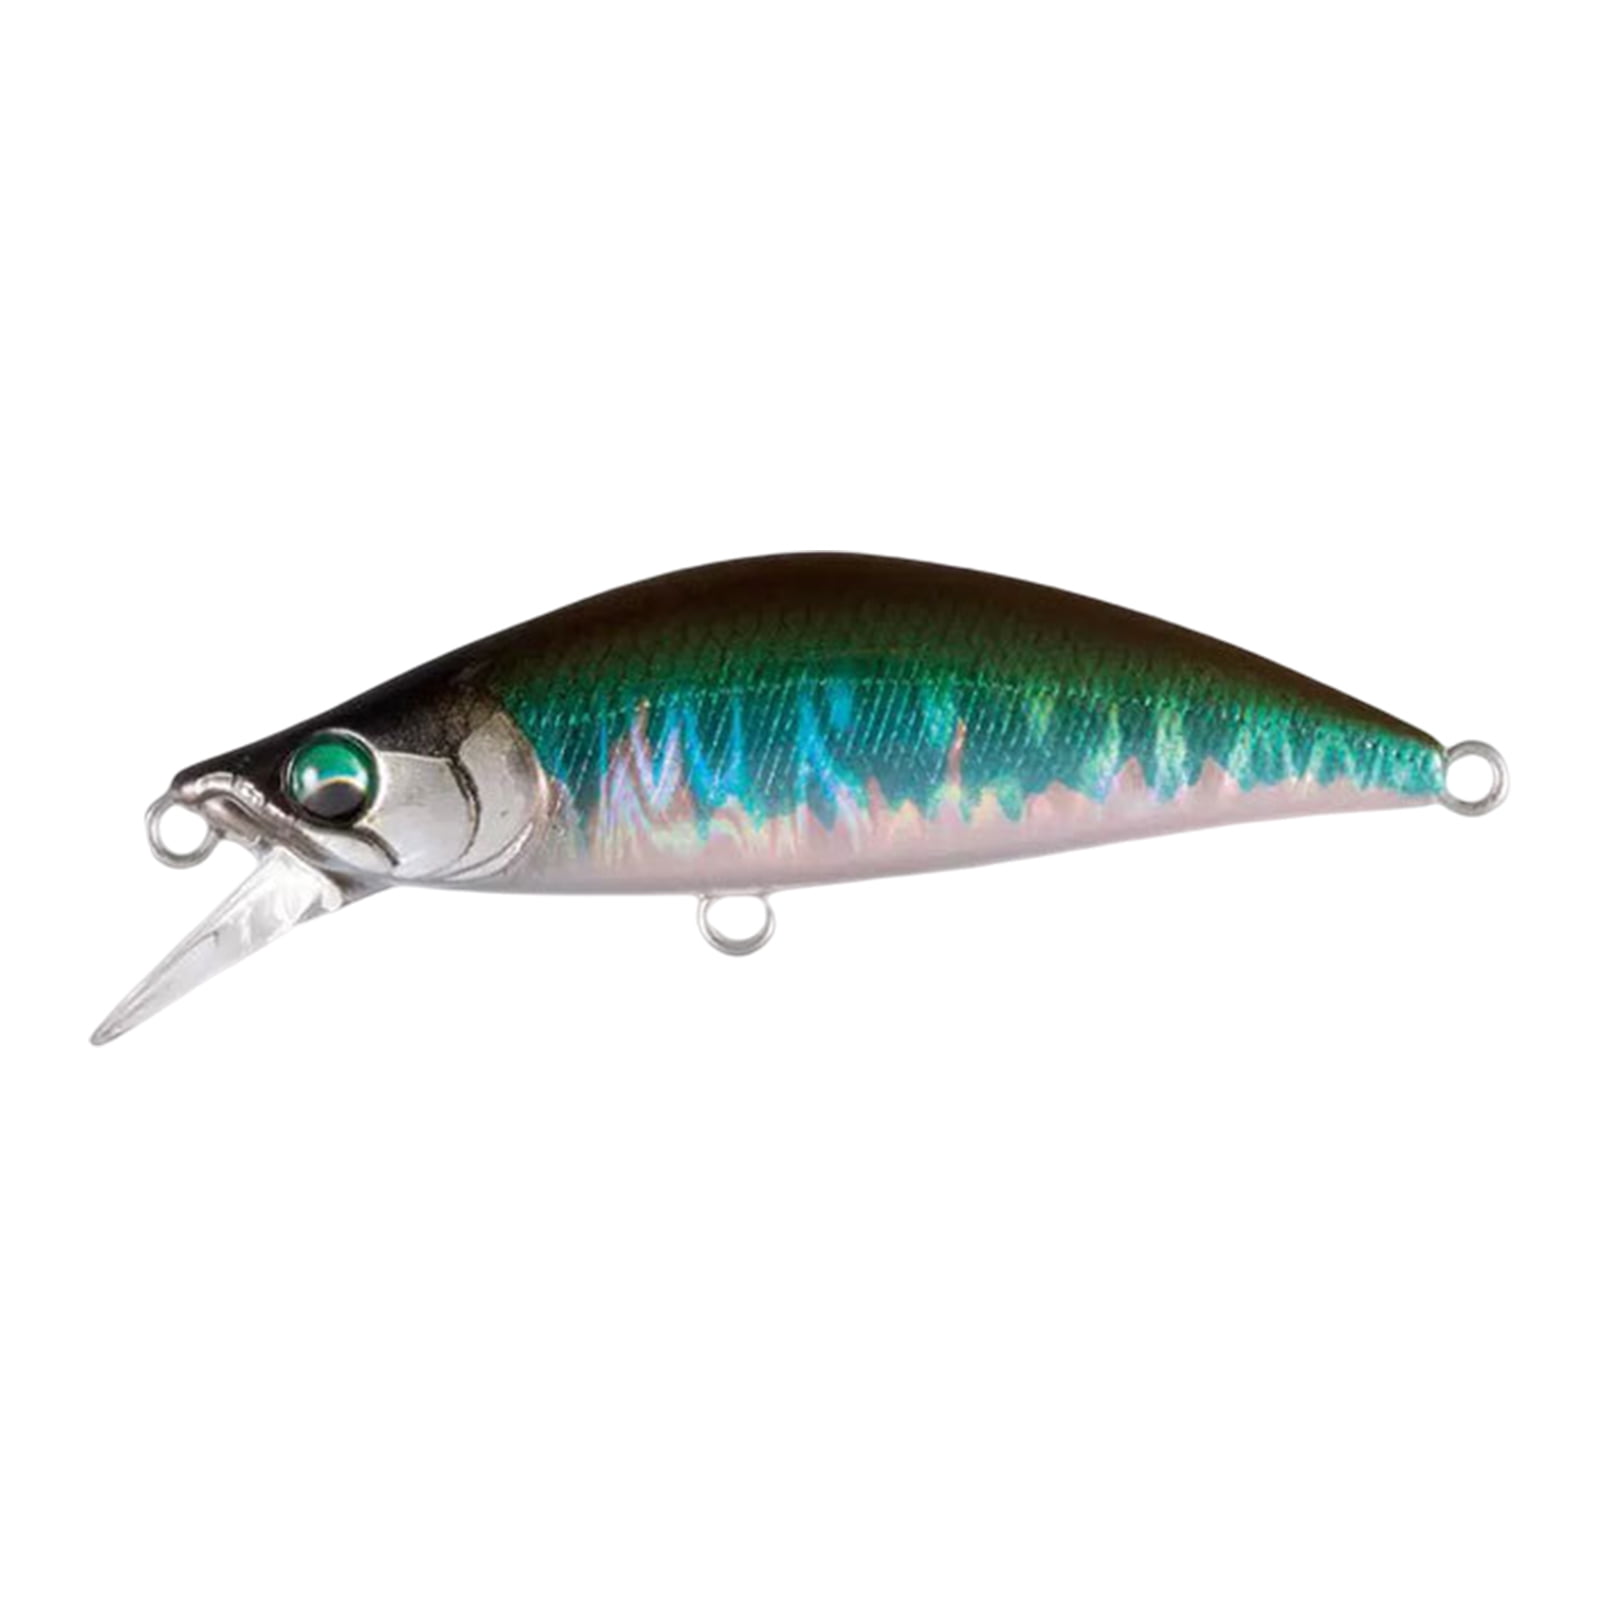 UDIYO 50mm/5.2g Fishing Lure Realistic 3D Simulation Fisheye Sharp Hook  Bright Color Long Throw Fishing Universal Submerged Minnow Sinking Bait for  Outdoor 